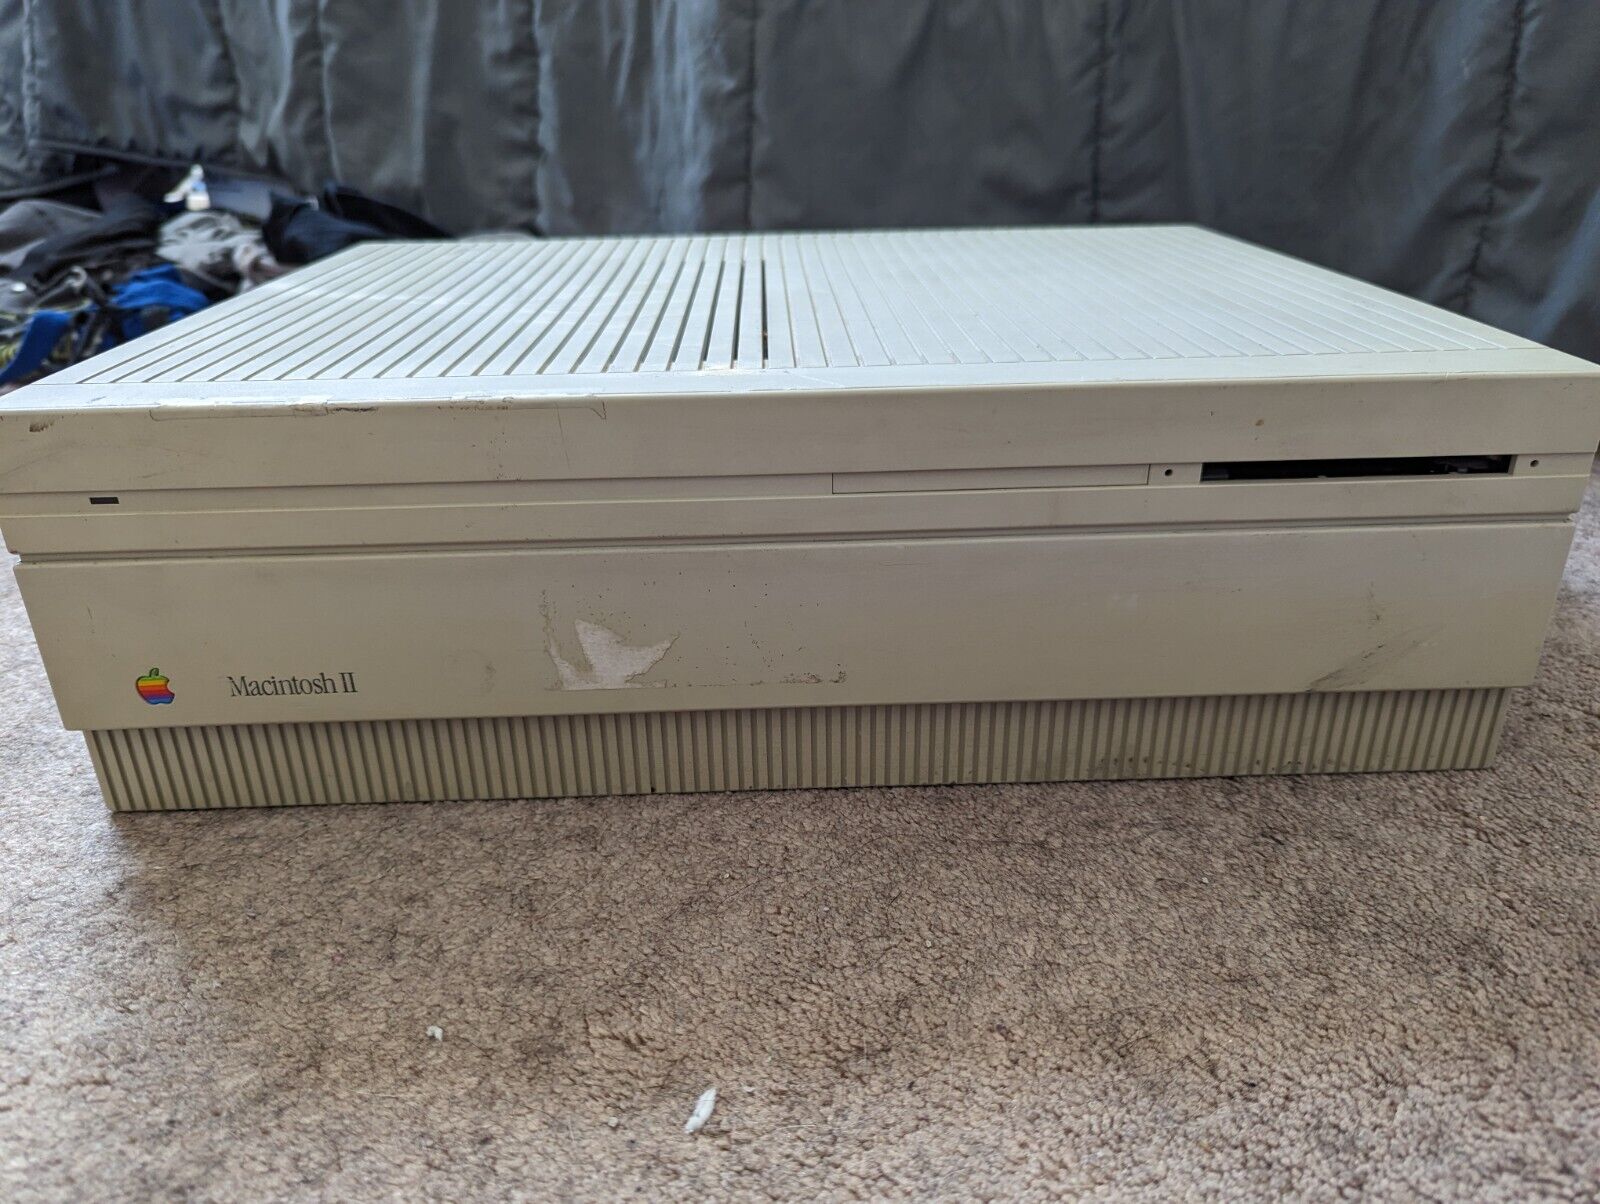 Vintage Apple Macintosh II M5000 Computer - UNTESTED for PARTS AND REPAIR